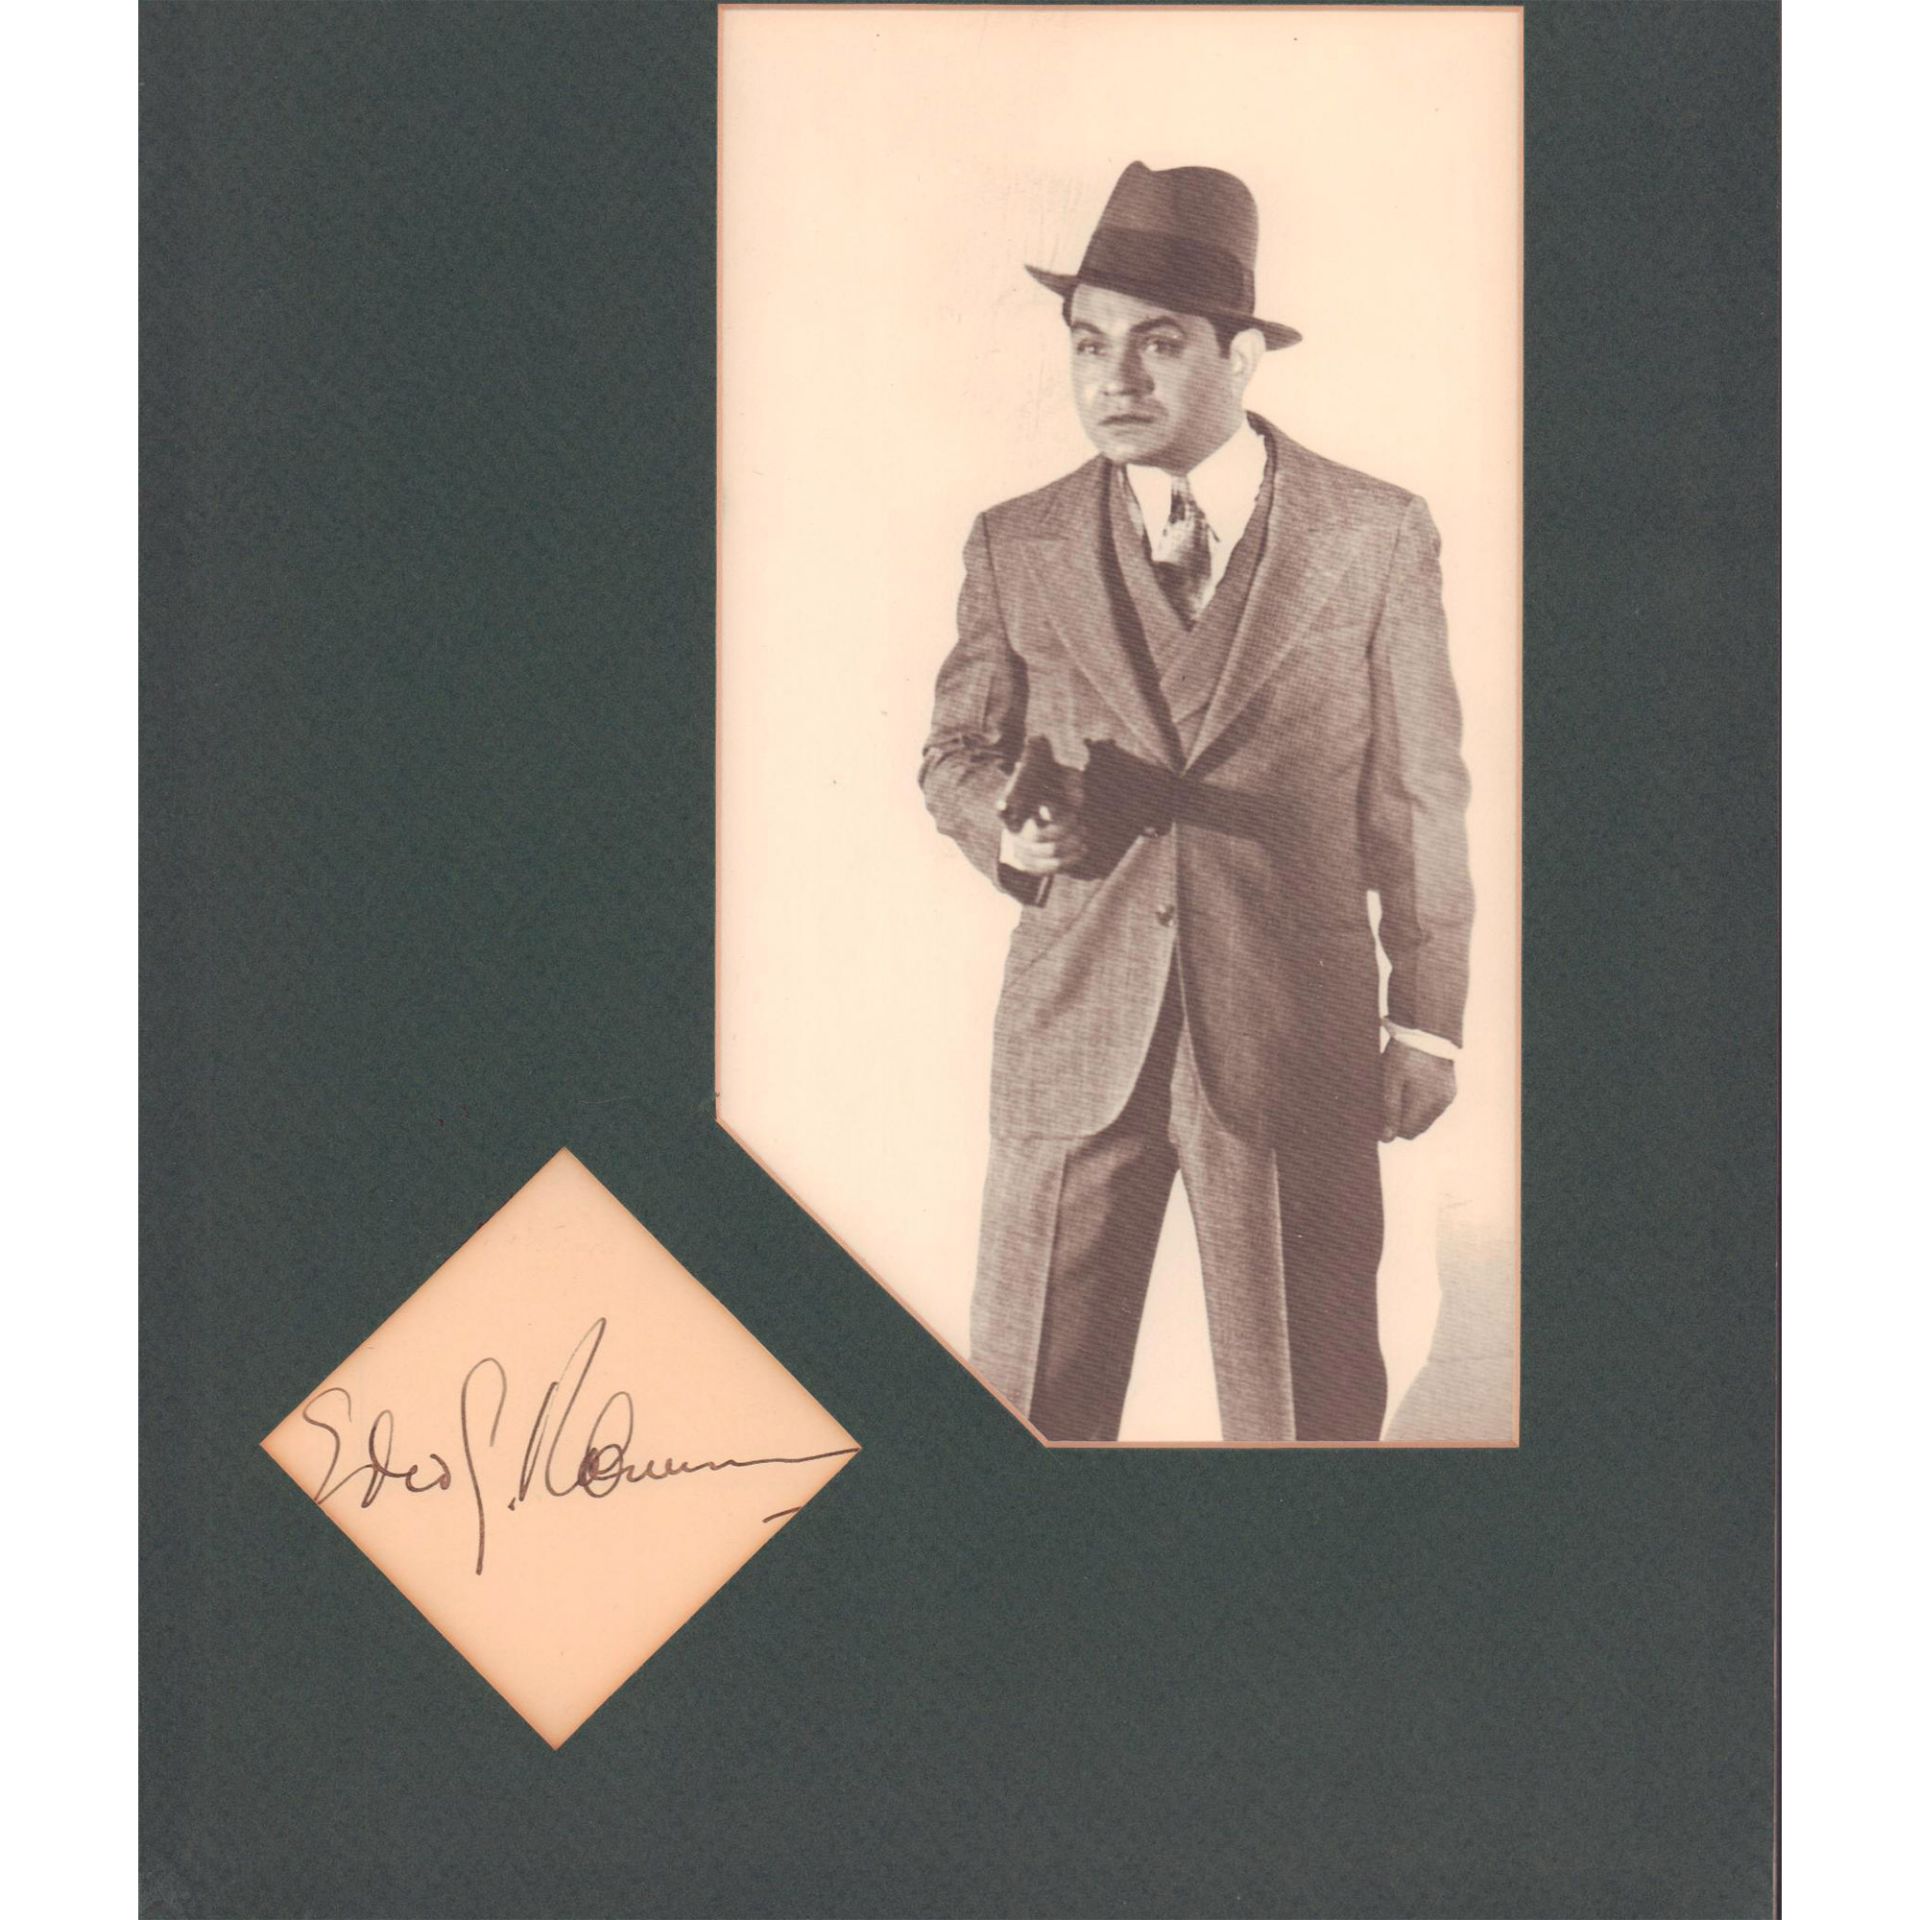 Photograph and Autograph, Edward G. Robinson as a Gangster